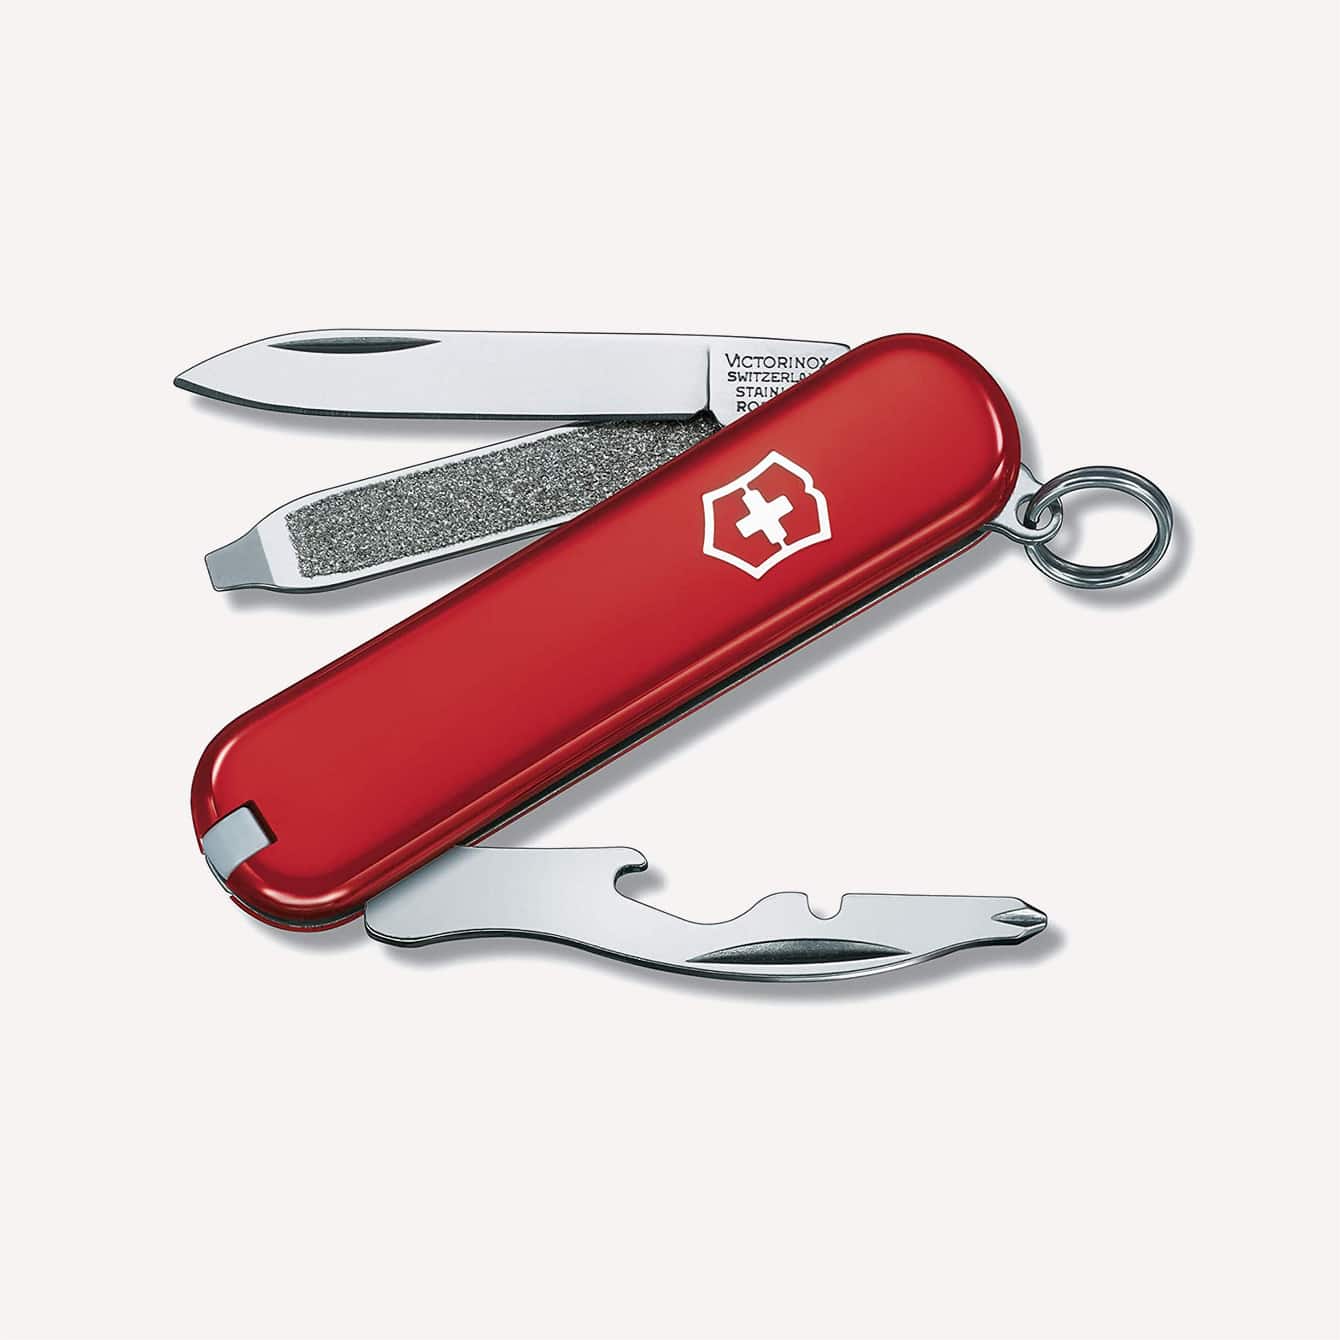 https://www.themodestman.com/wp-content/uploads/2021/05/Victorinox-Swiss-Army-Rally-Pocket-Knife-Small-Red.jpg